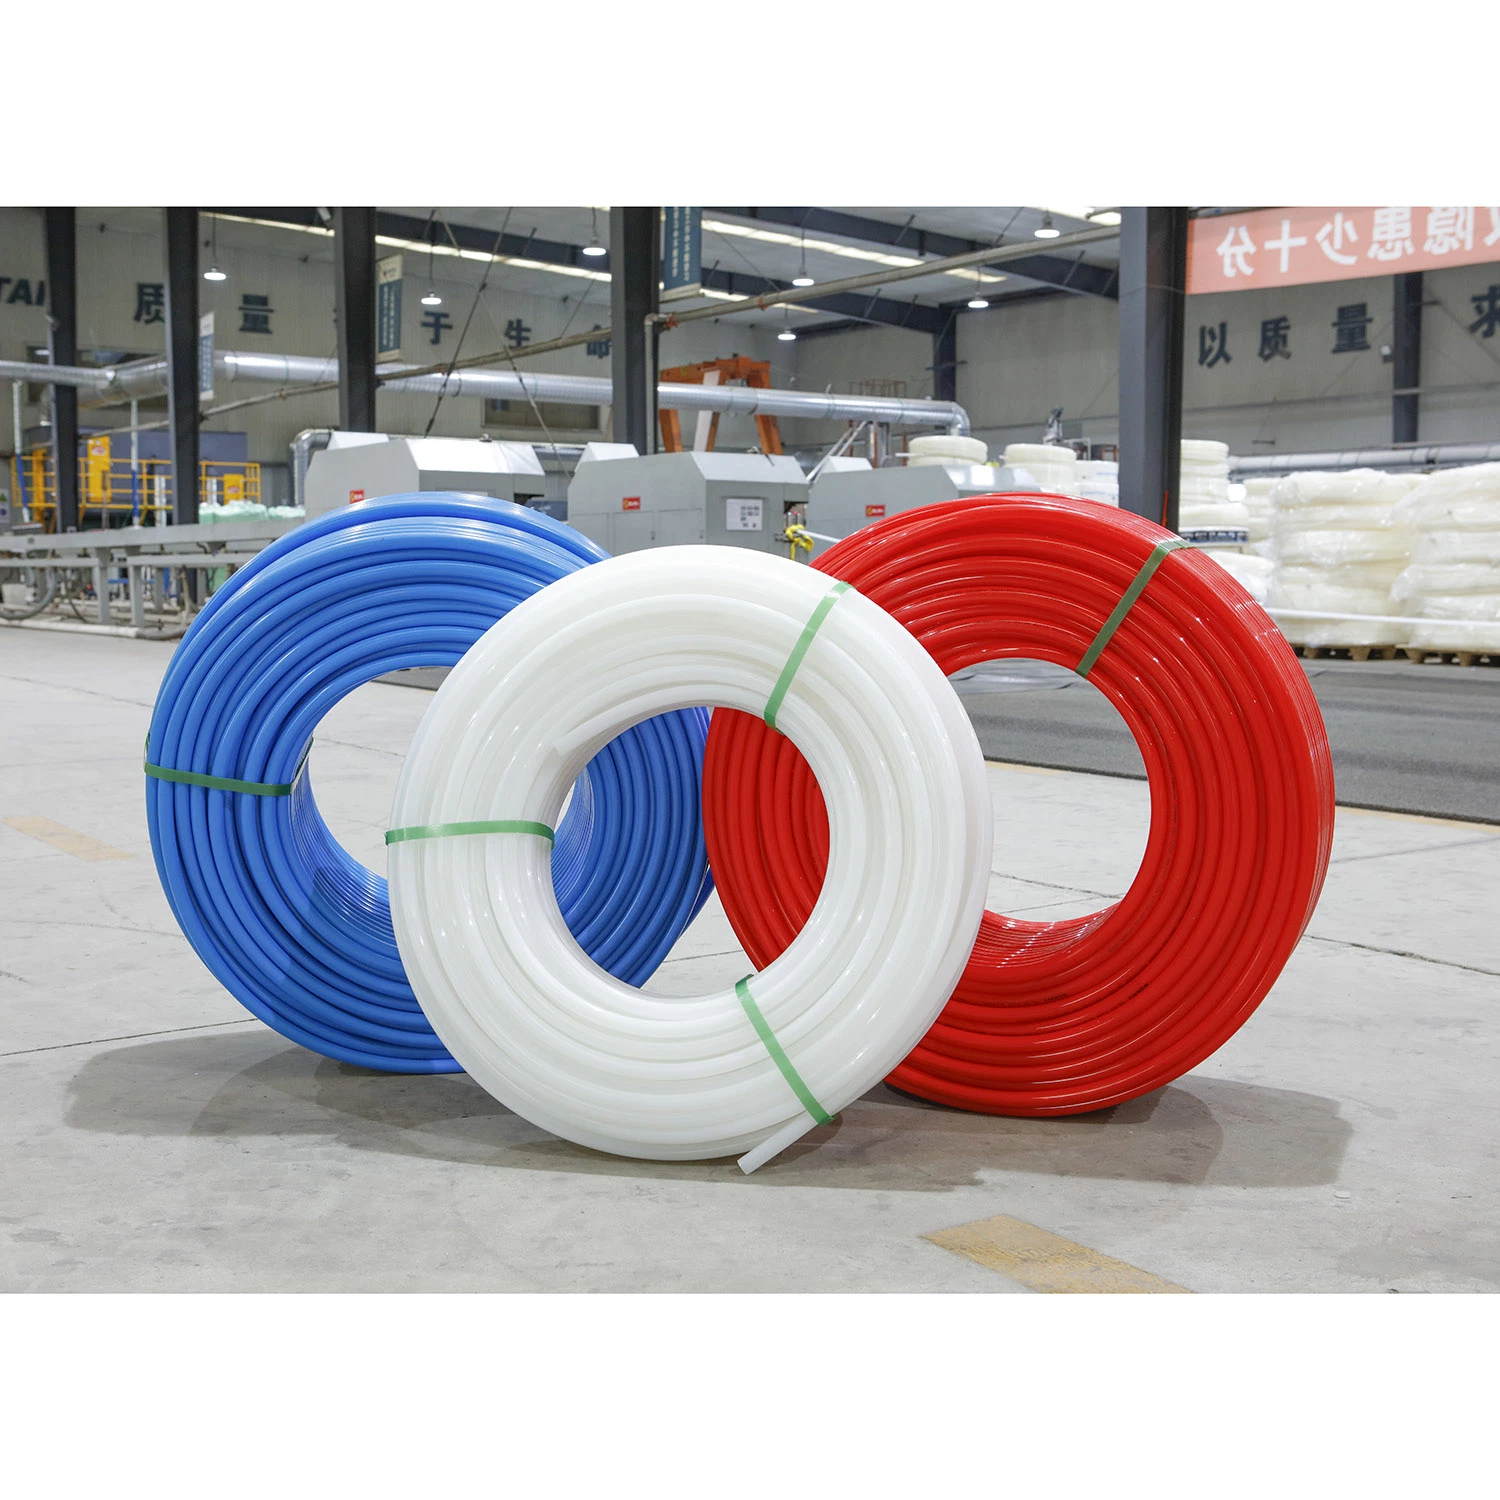 International Standard Pex-a Pipe/Pert Pipe/PPR with Oxygen Barrier for Underfloor Heating